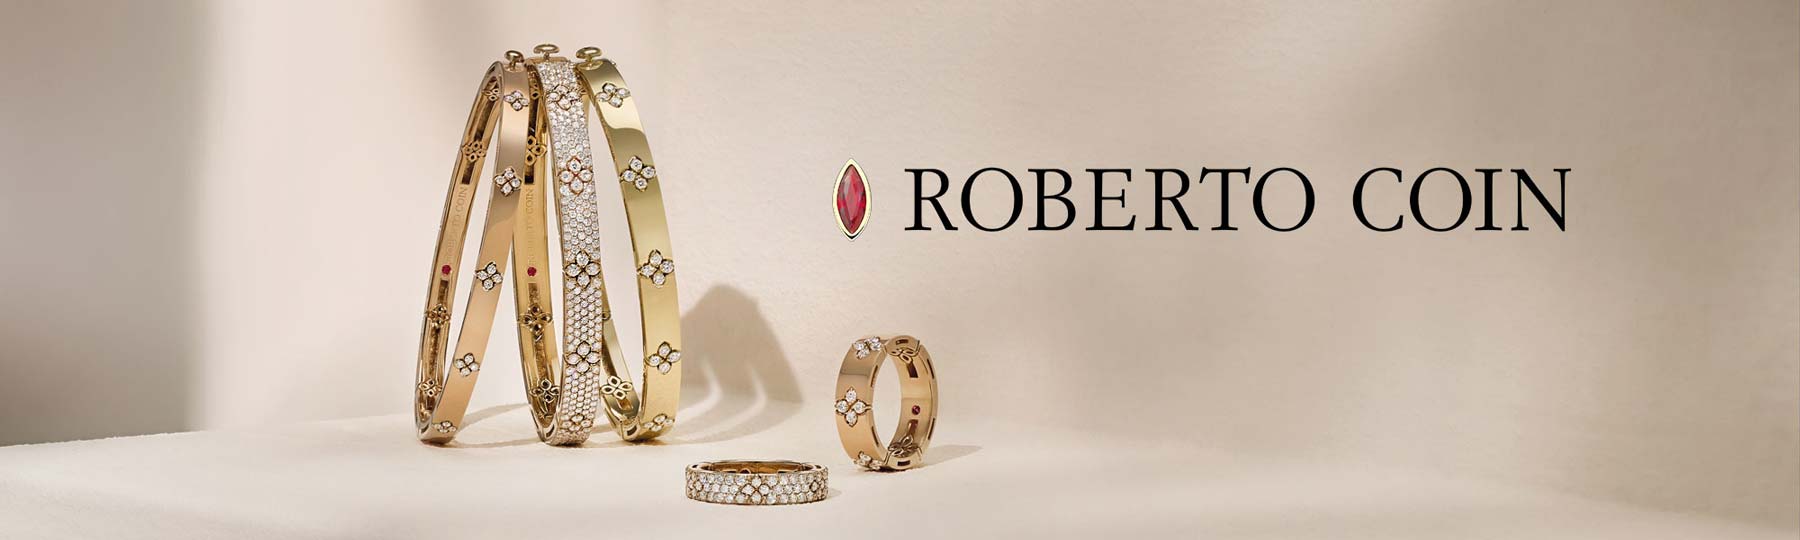 roberto coin brand header image for brand page top banner